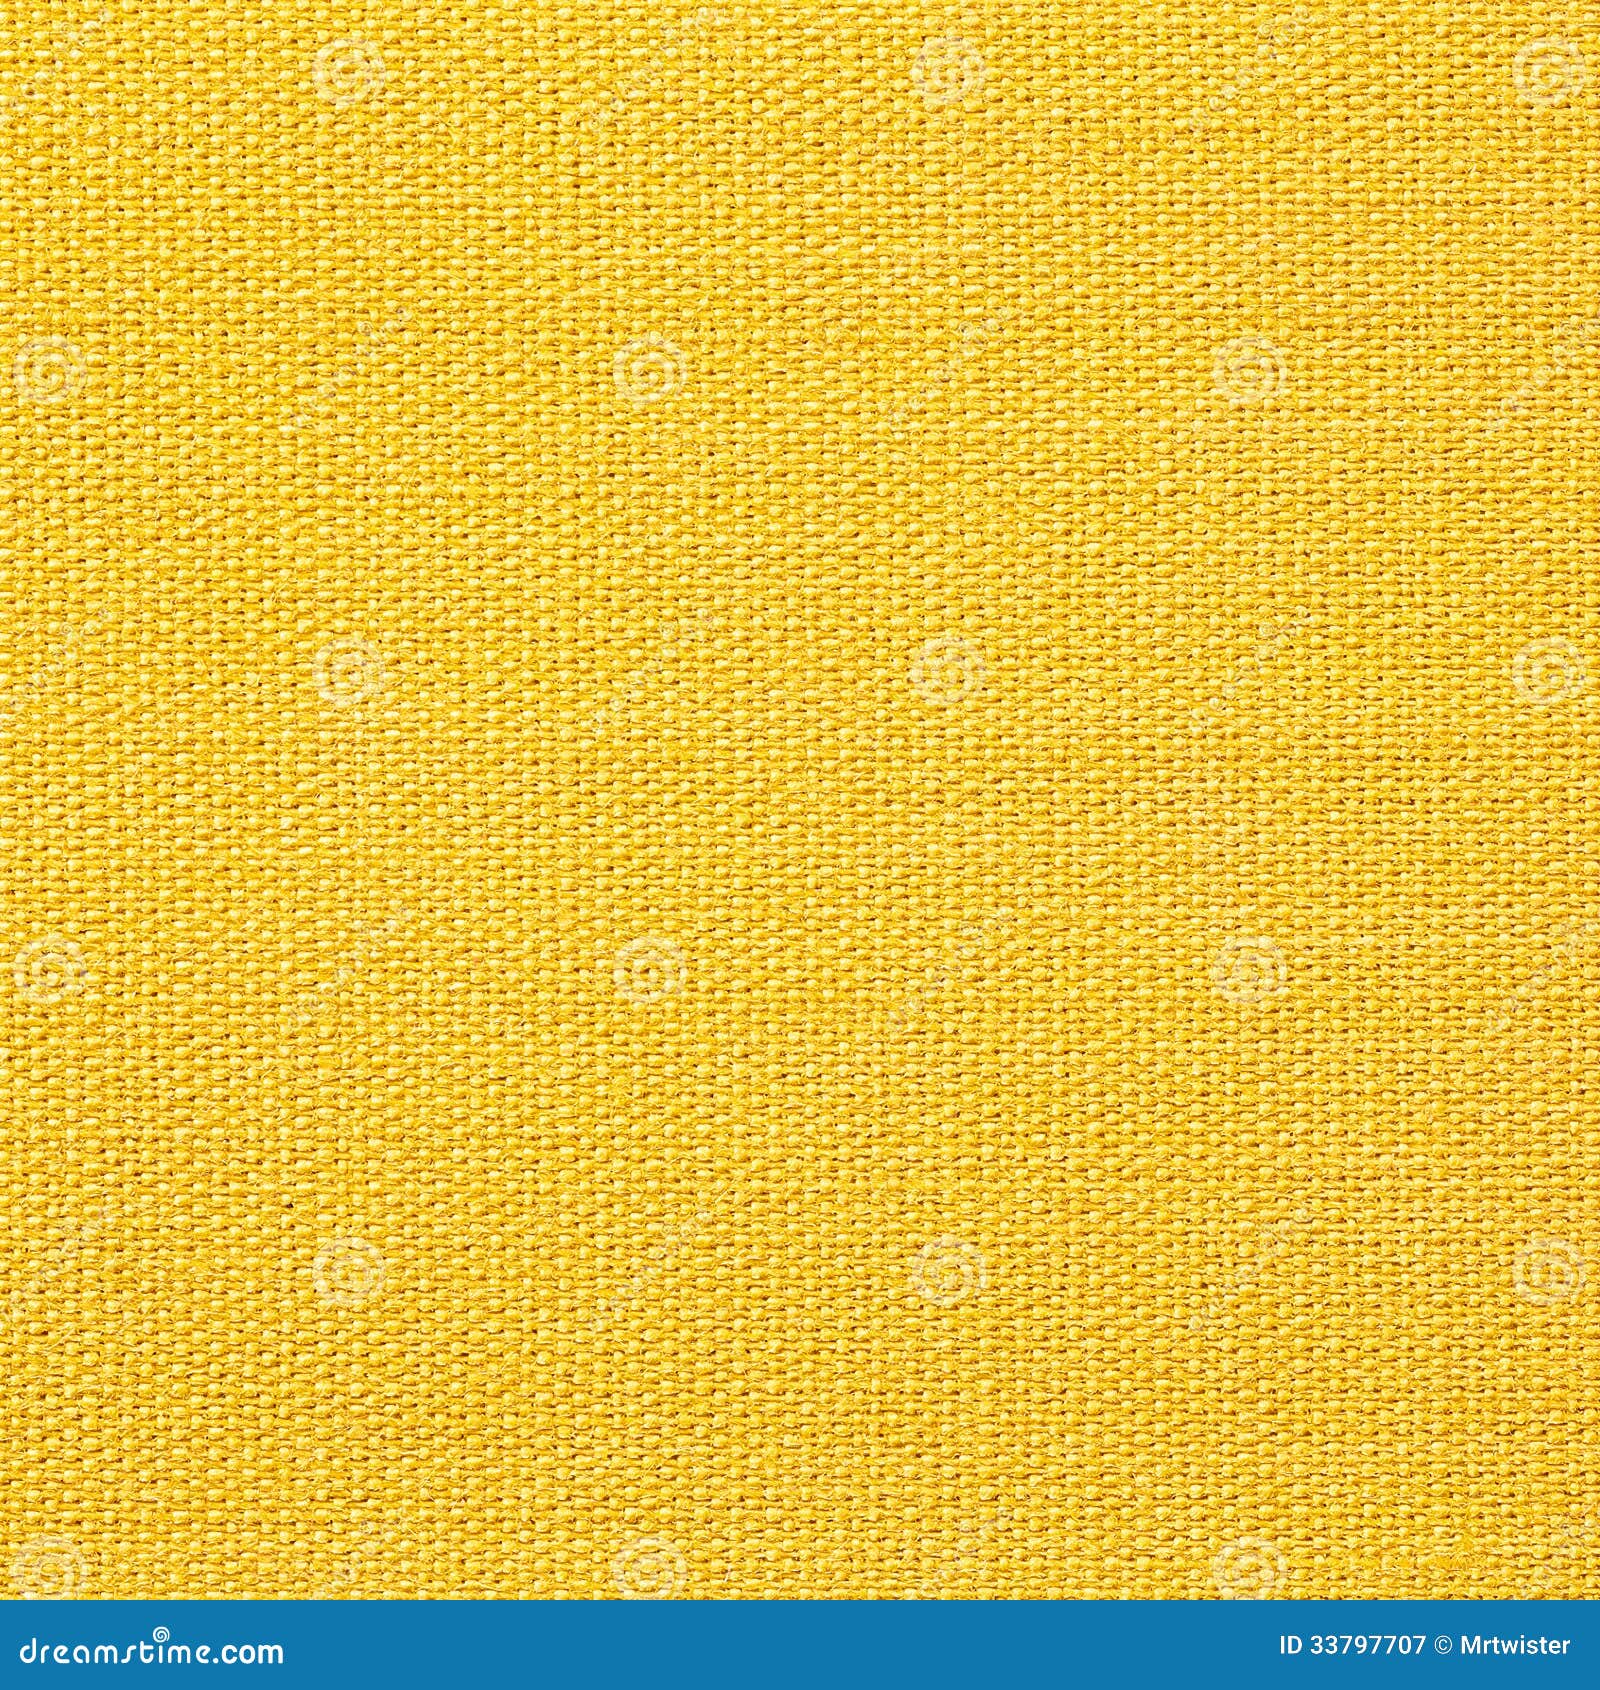 Yellow Canvas Royalty Free Stock Photography - Image: 33797707